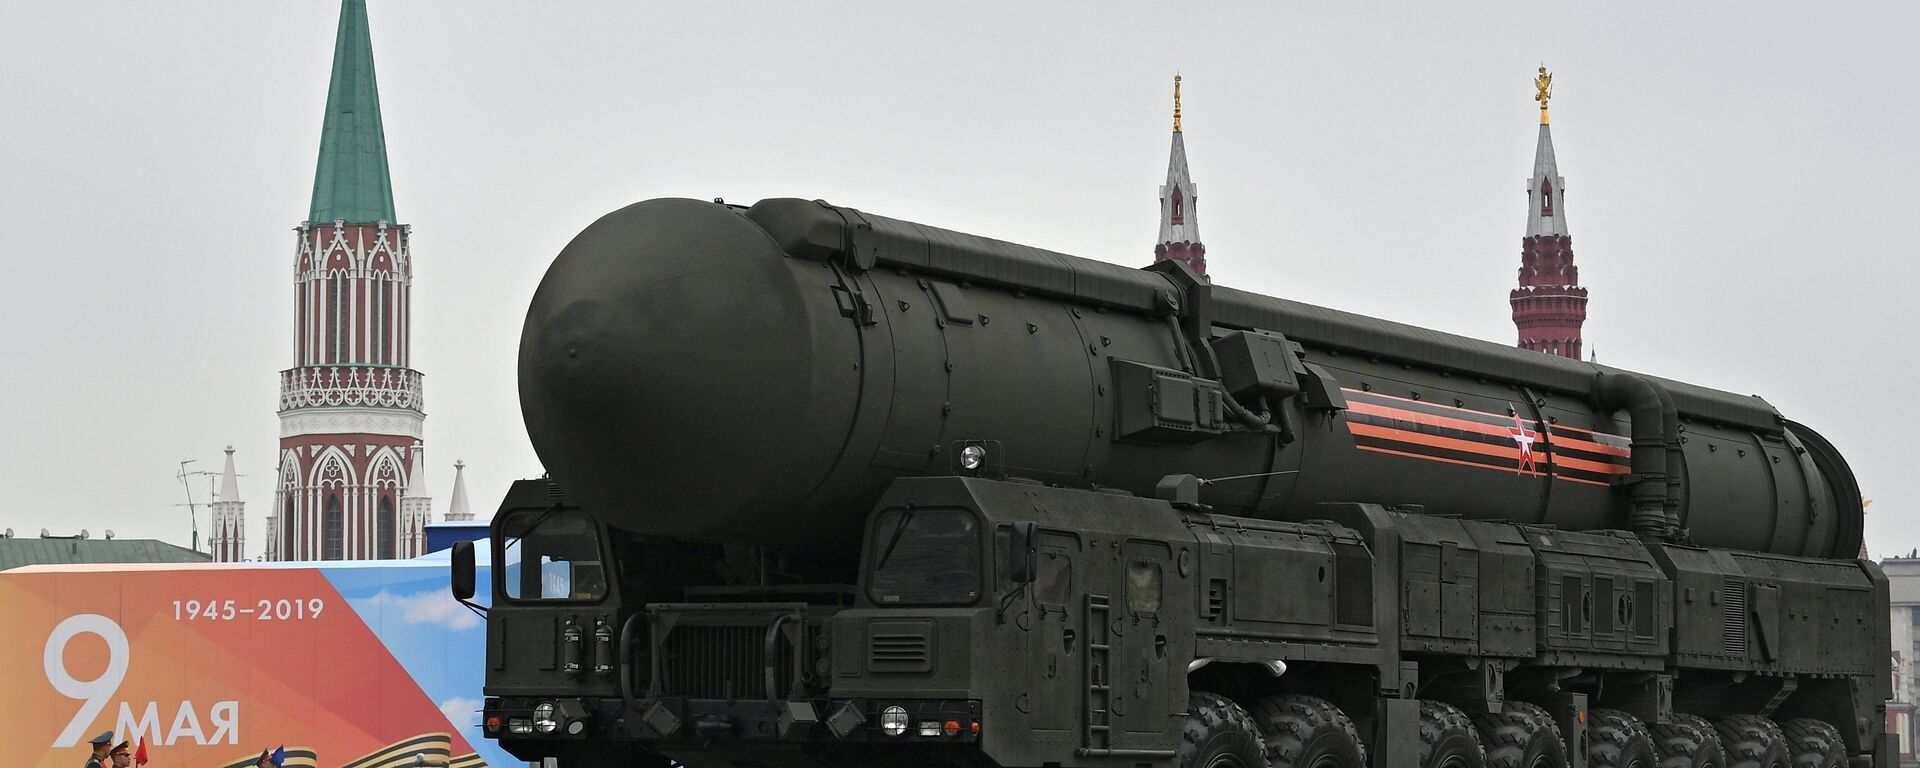 A Russian RS-24 Yars intercontinental ballistic missile system rolls down the Red Square during the Victory Day parade in Moscow on 9 May, 2019 - Sputnik International, 1920, 30.03.2023